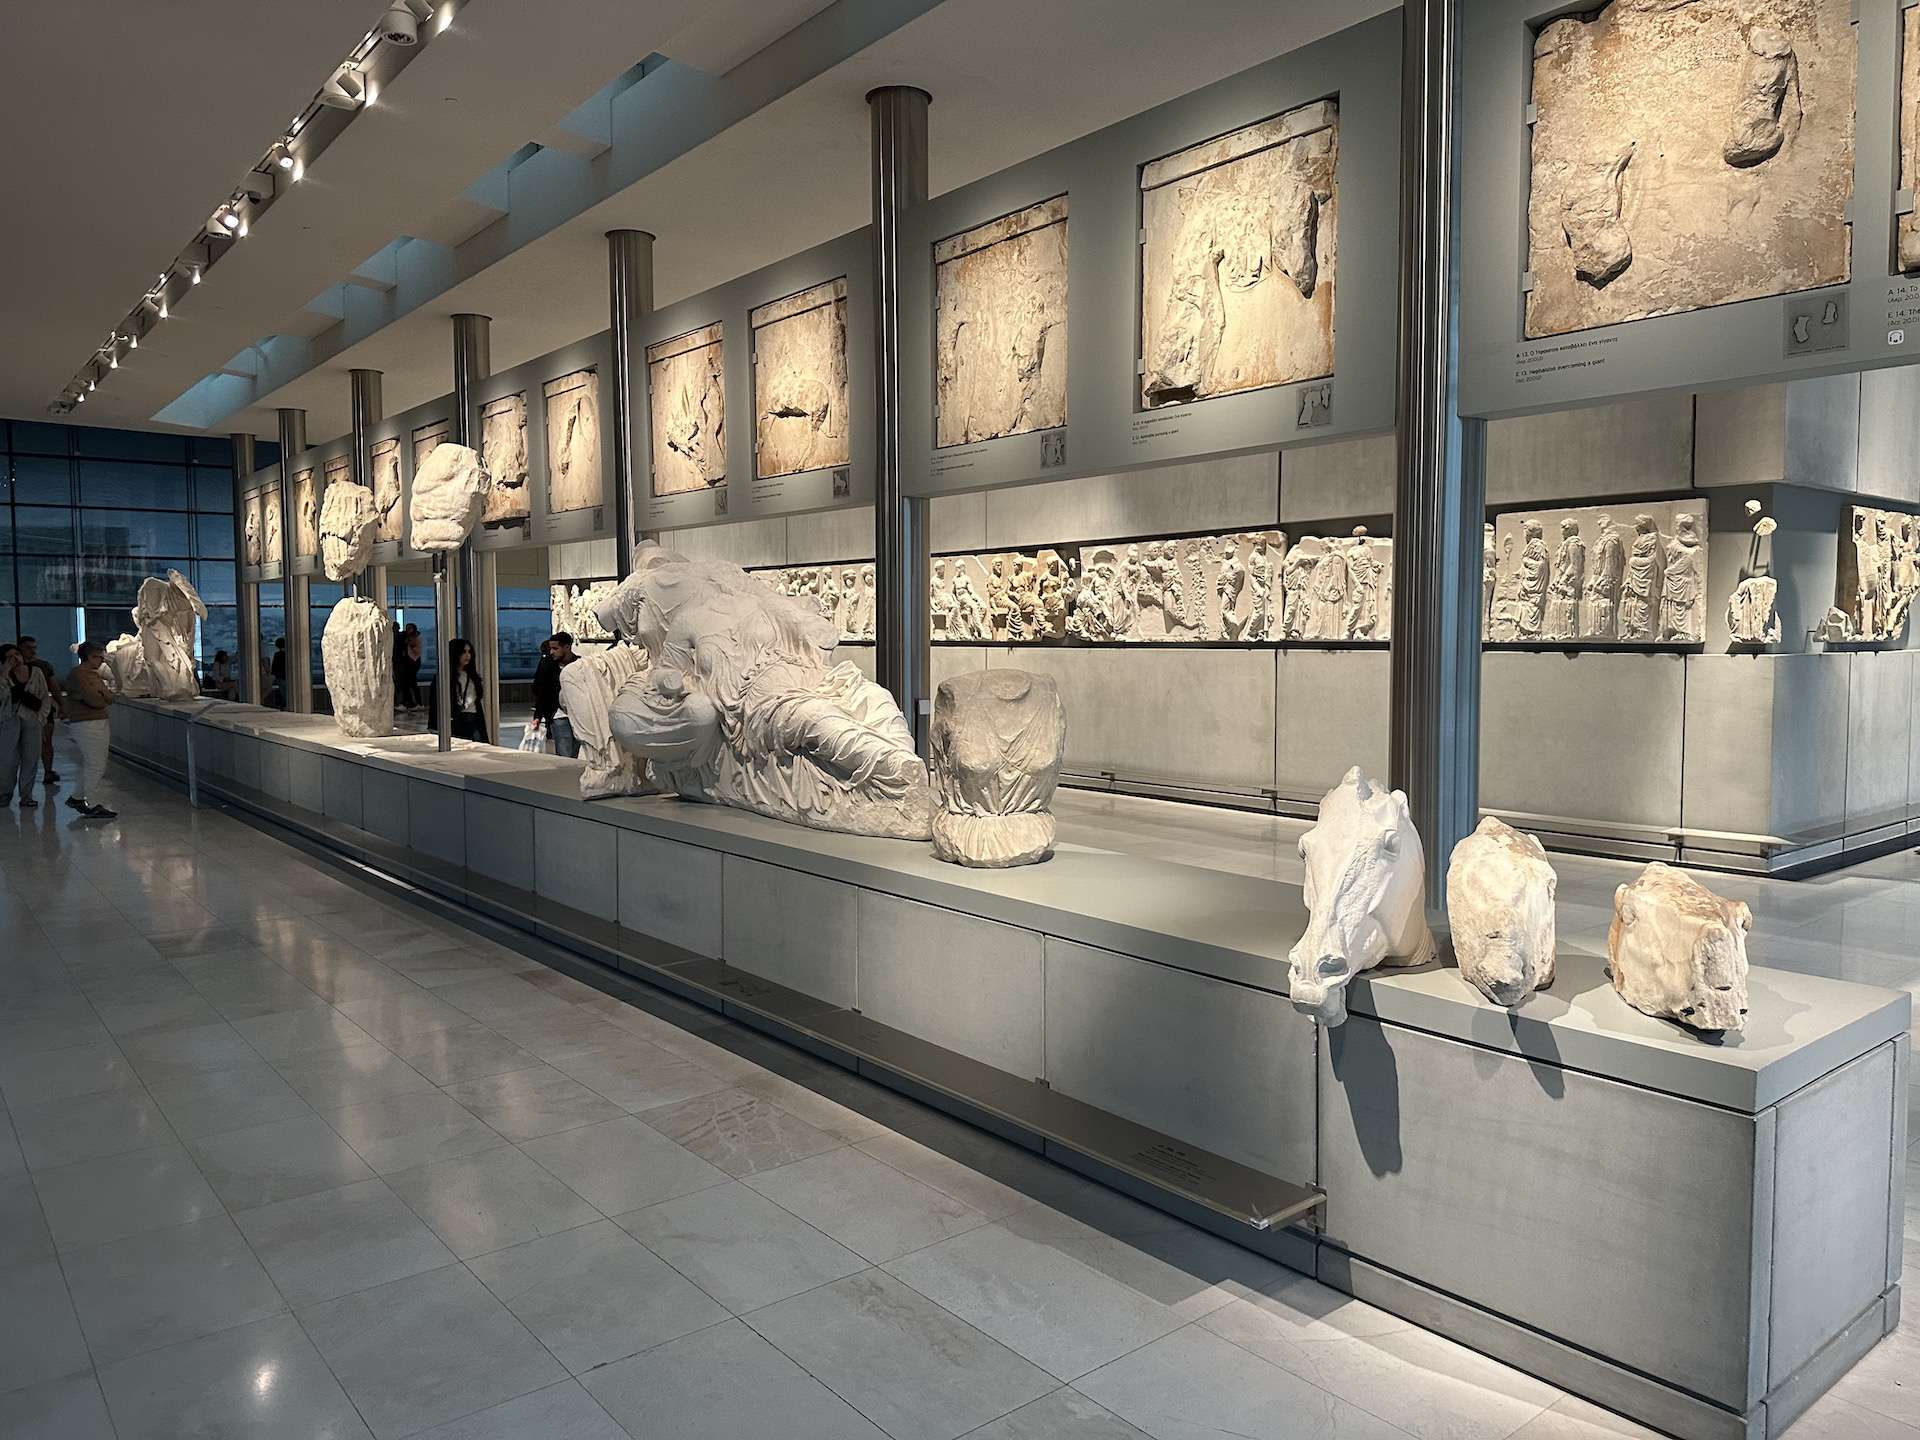 East pediment of the Parthenon at the Acropolis Museum in Athens, Greece